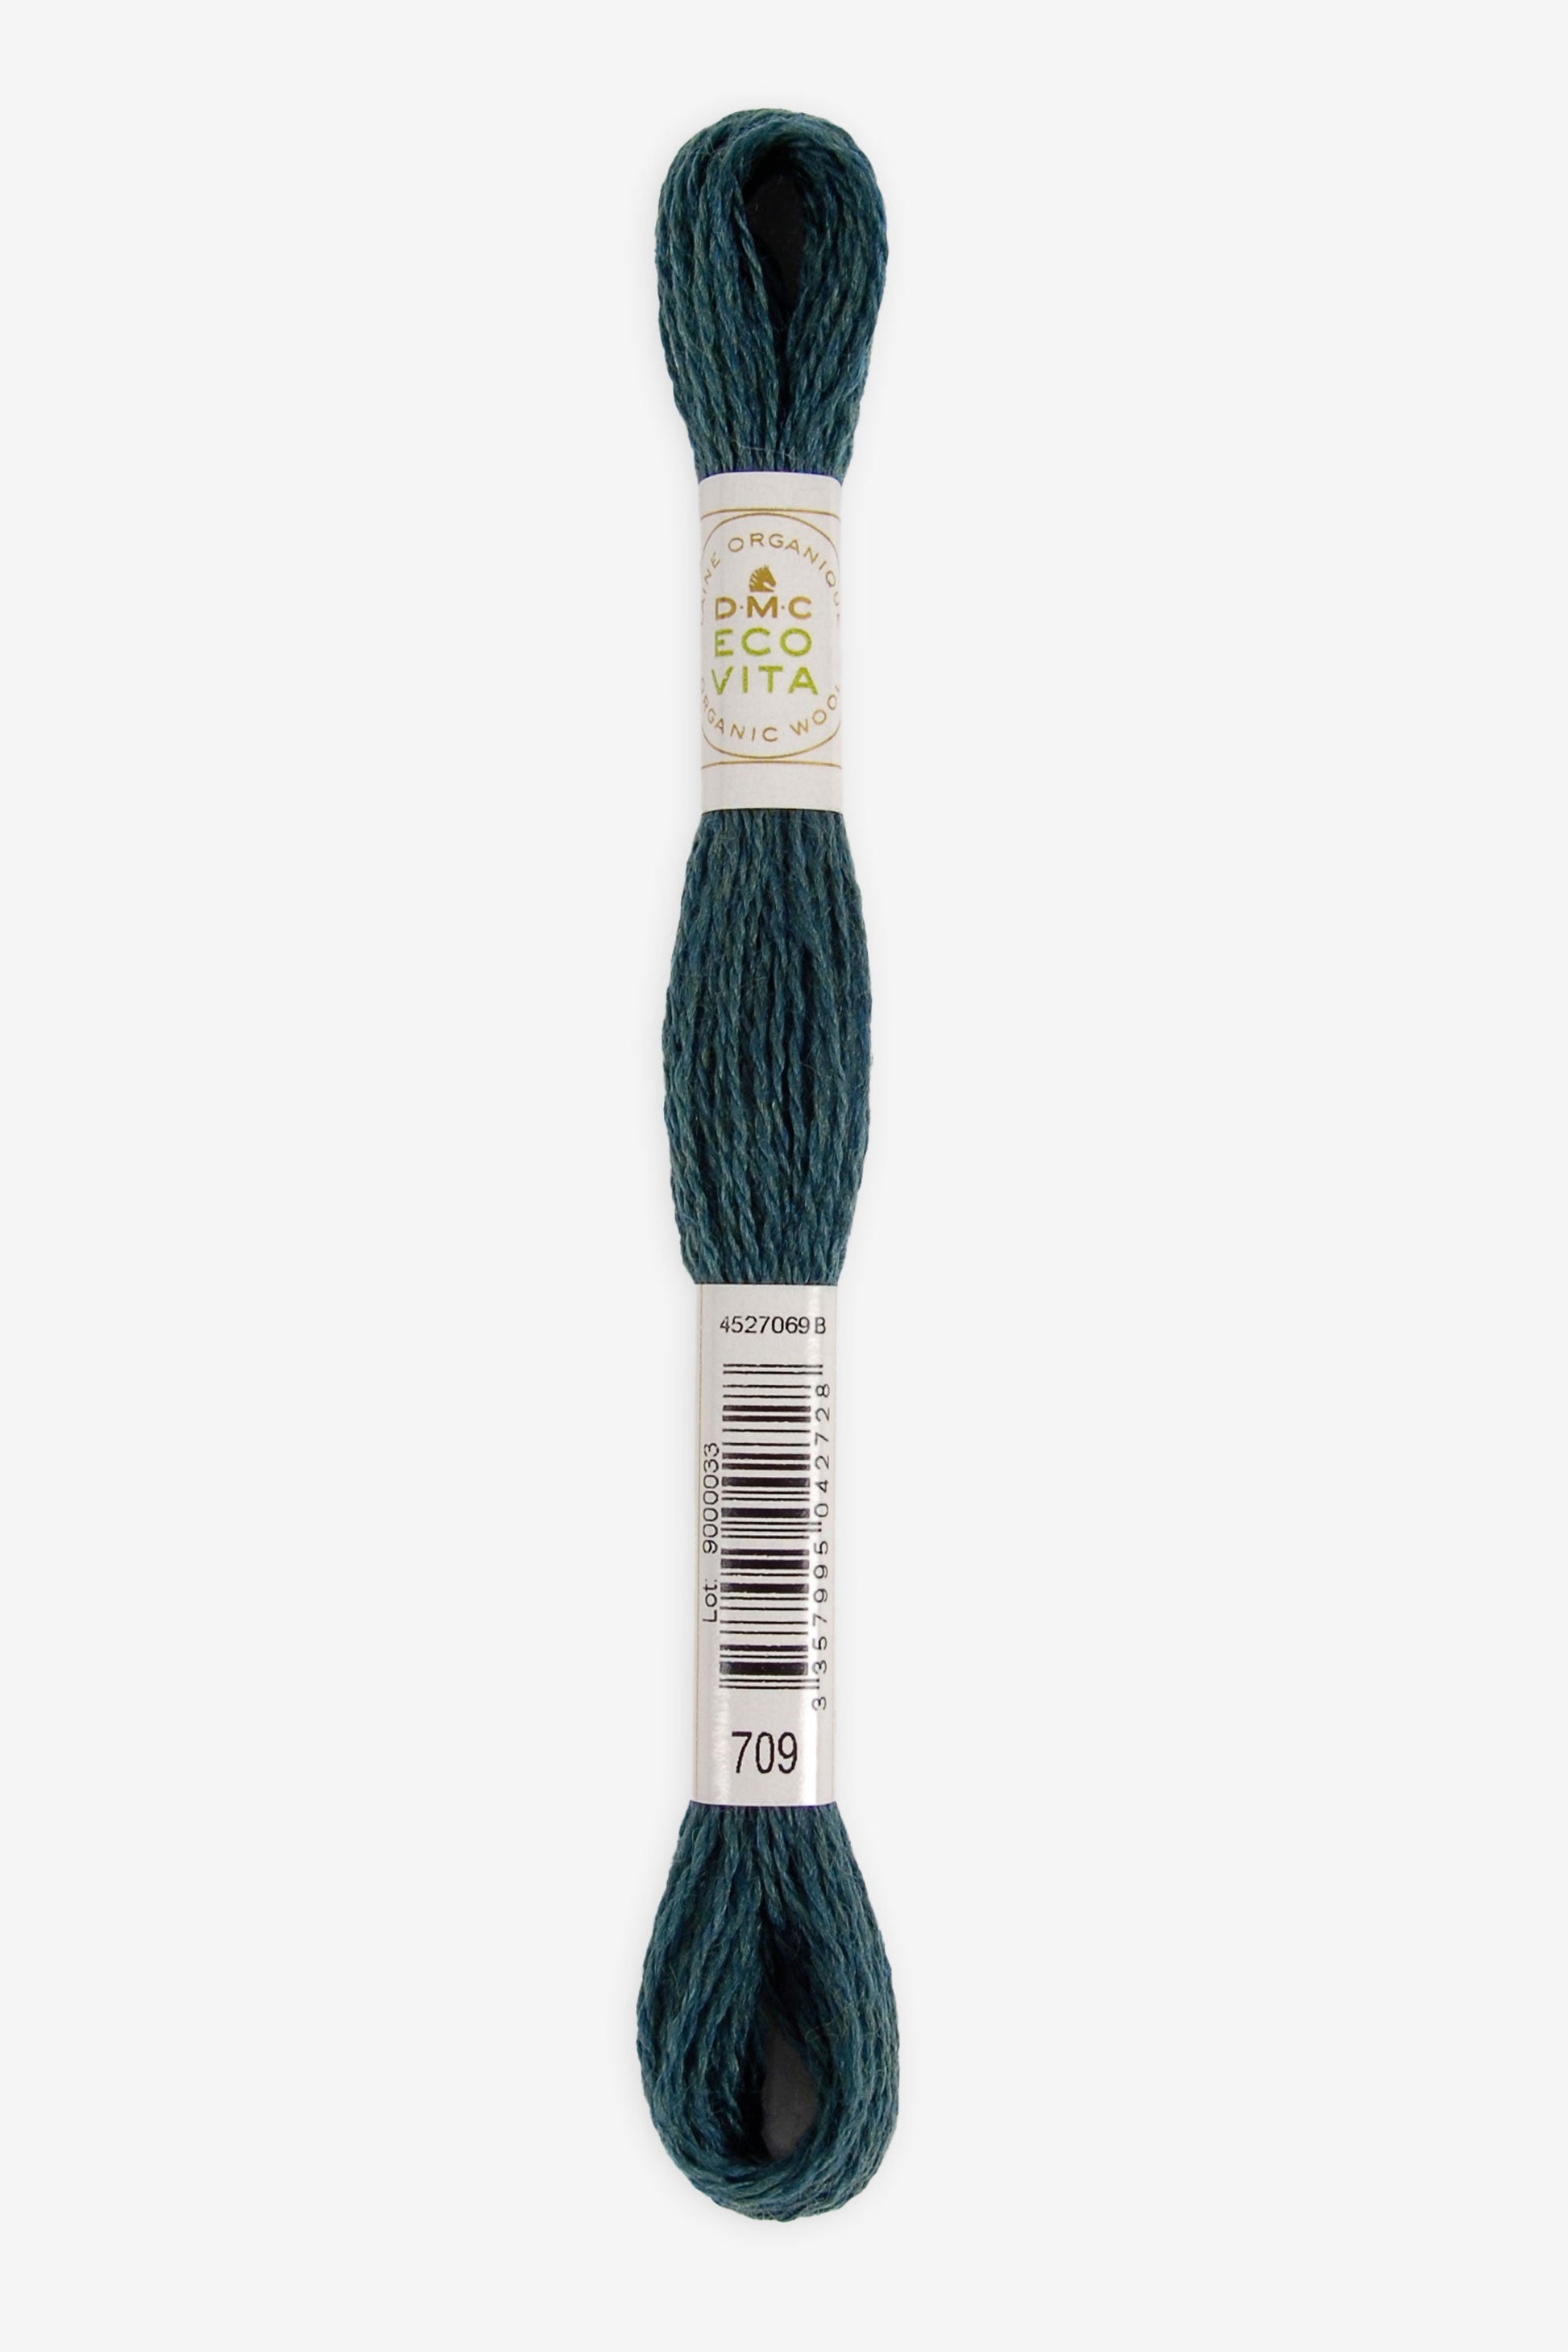 Single skein of Eco Vita Crewel Wool thread from DMC in color #709 against a white background